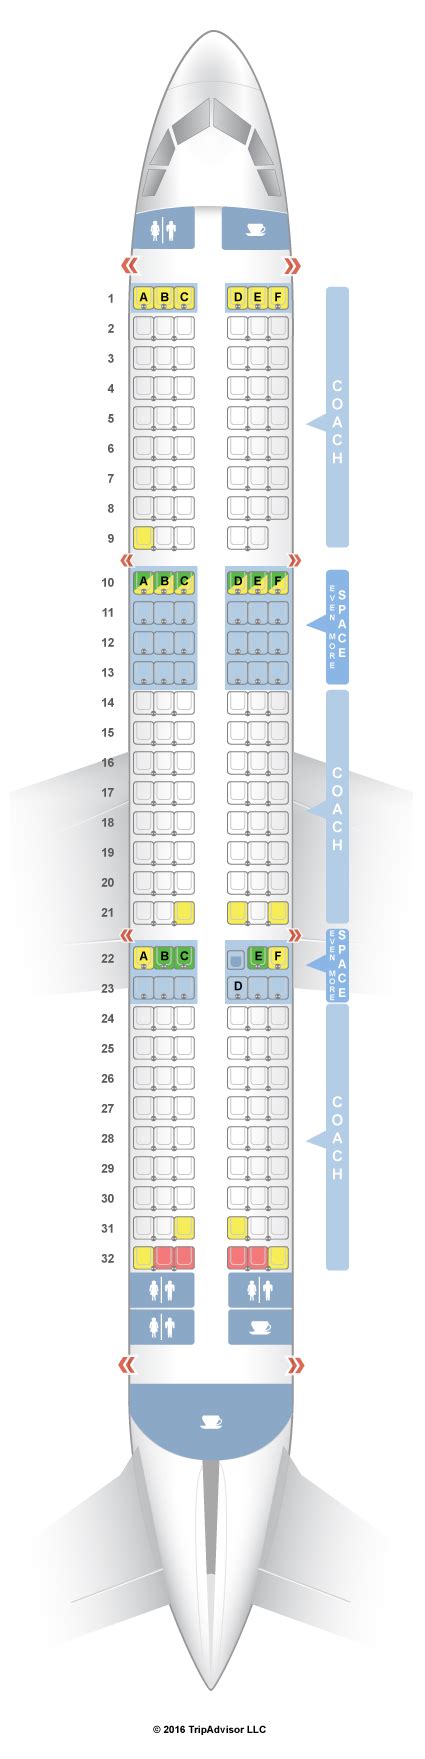 26 Jetblue A321 Seat Map Maps Database Source